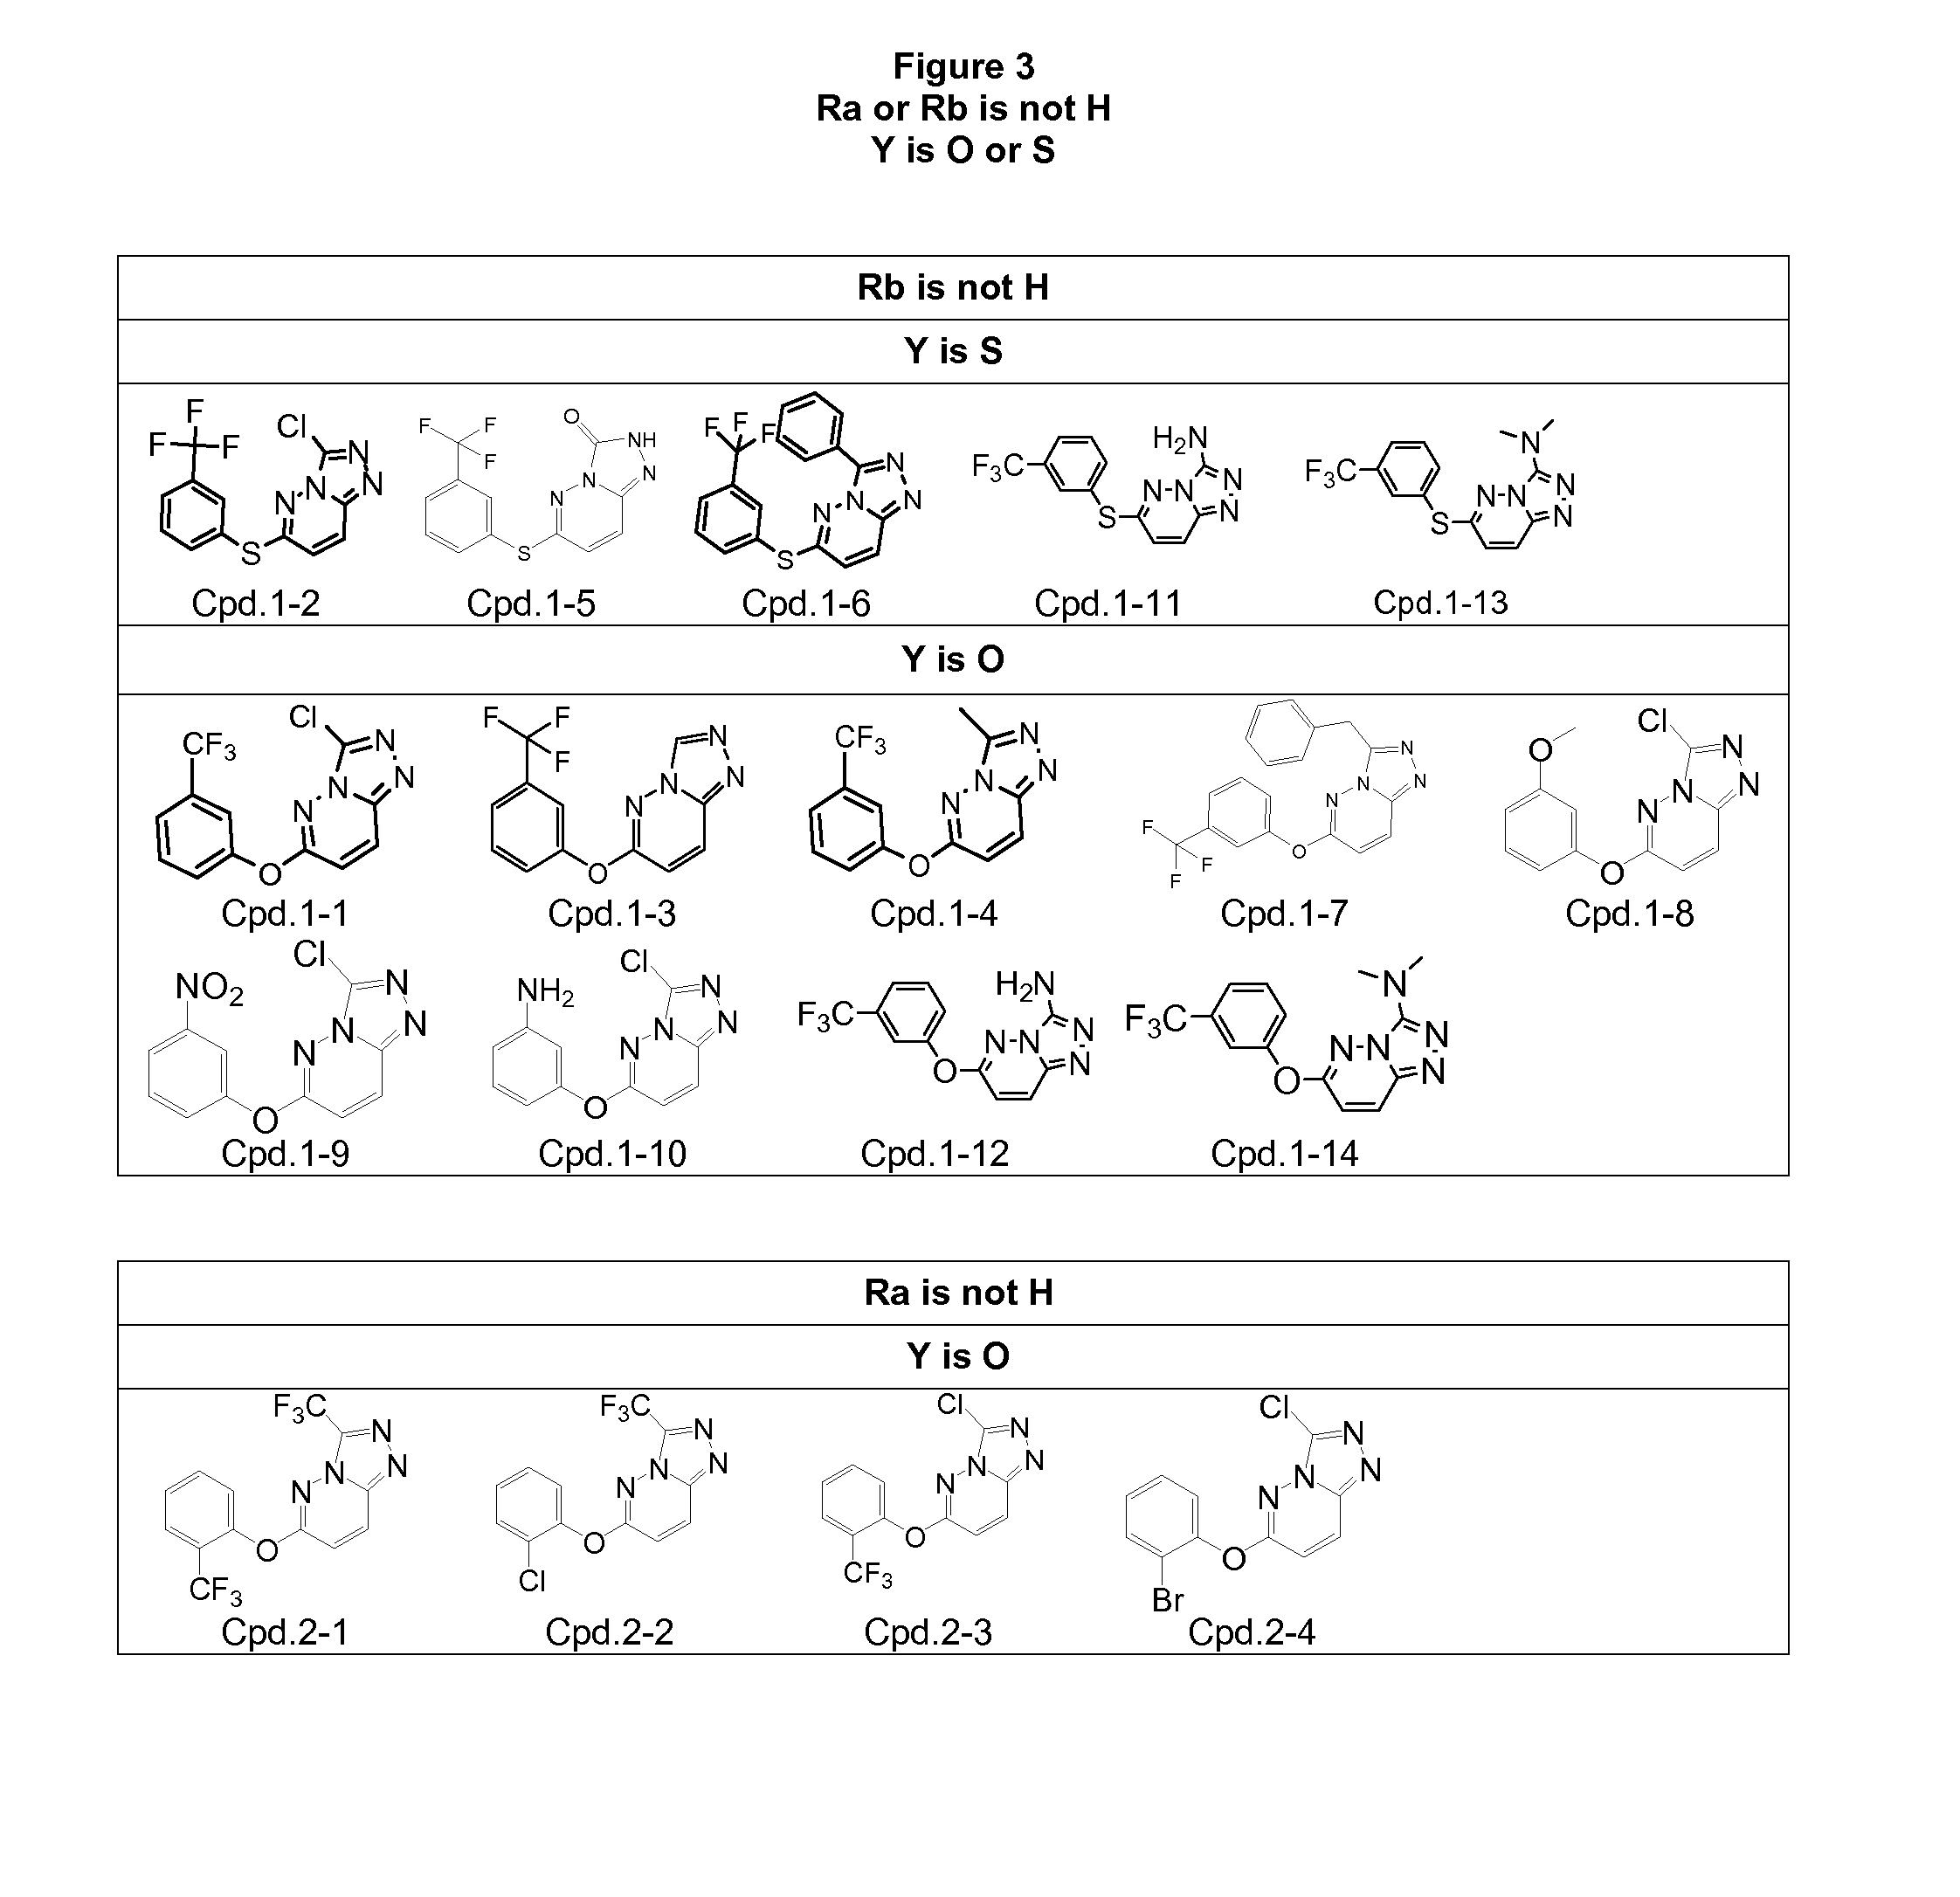 Derivatives of 6-substituted triazolopyridazines as rev-erb agonists